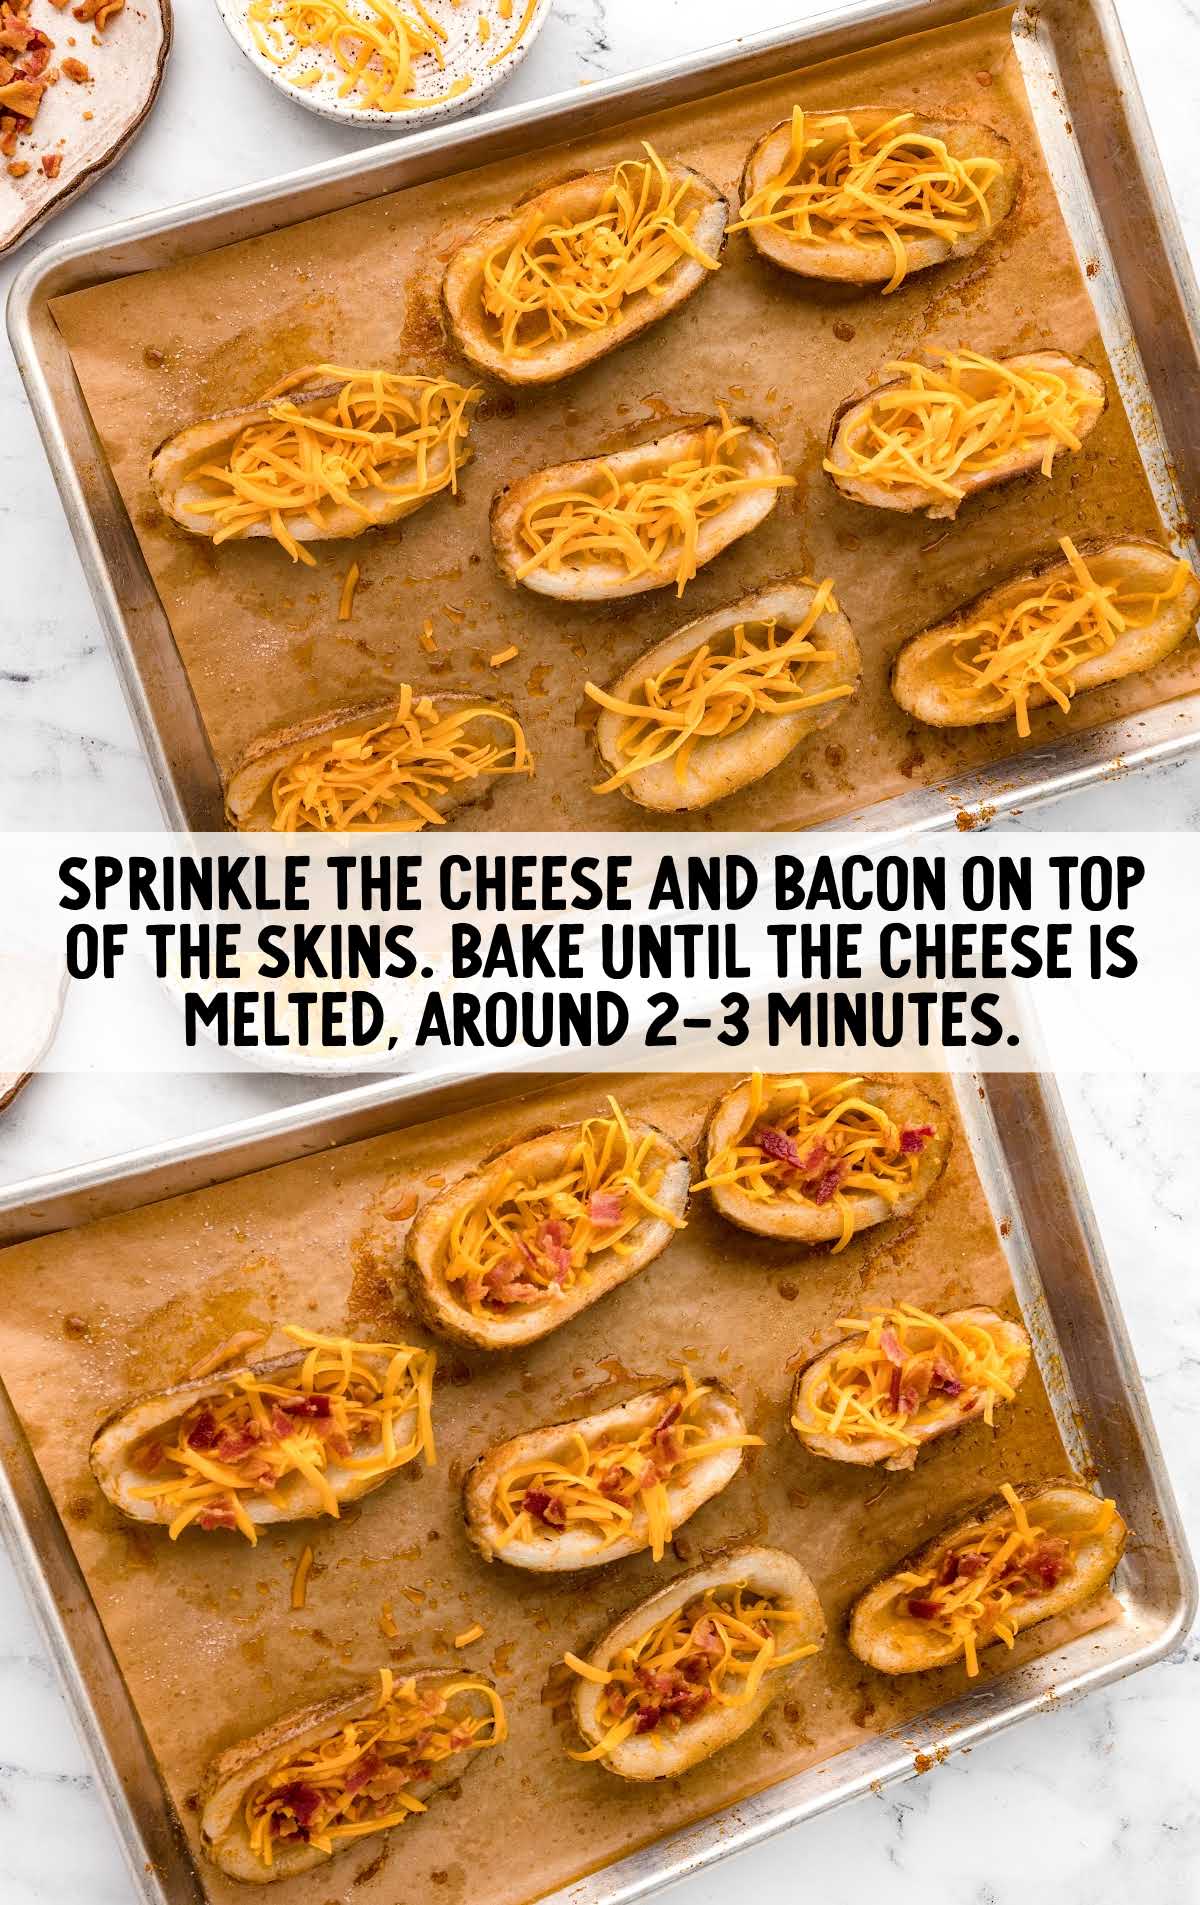 Baked Potato Skins topped with shredded cheese and bacon